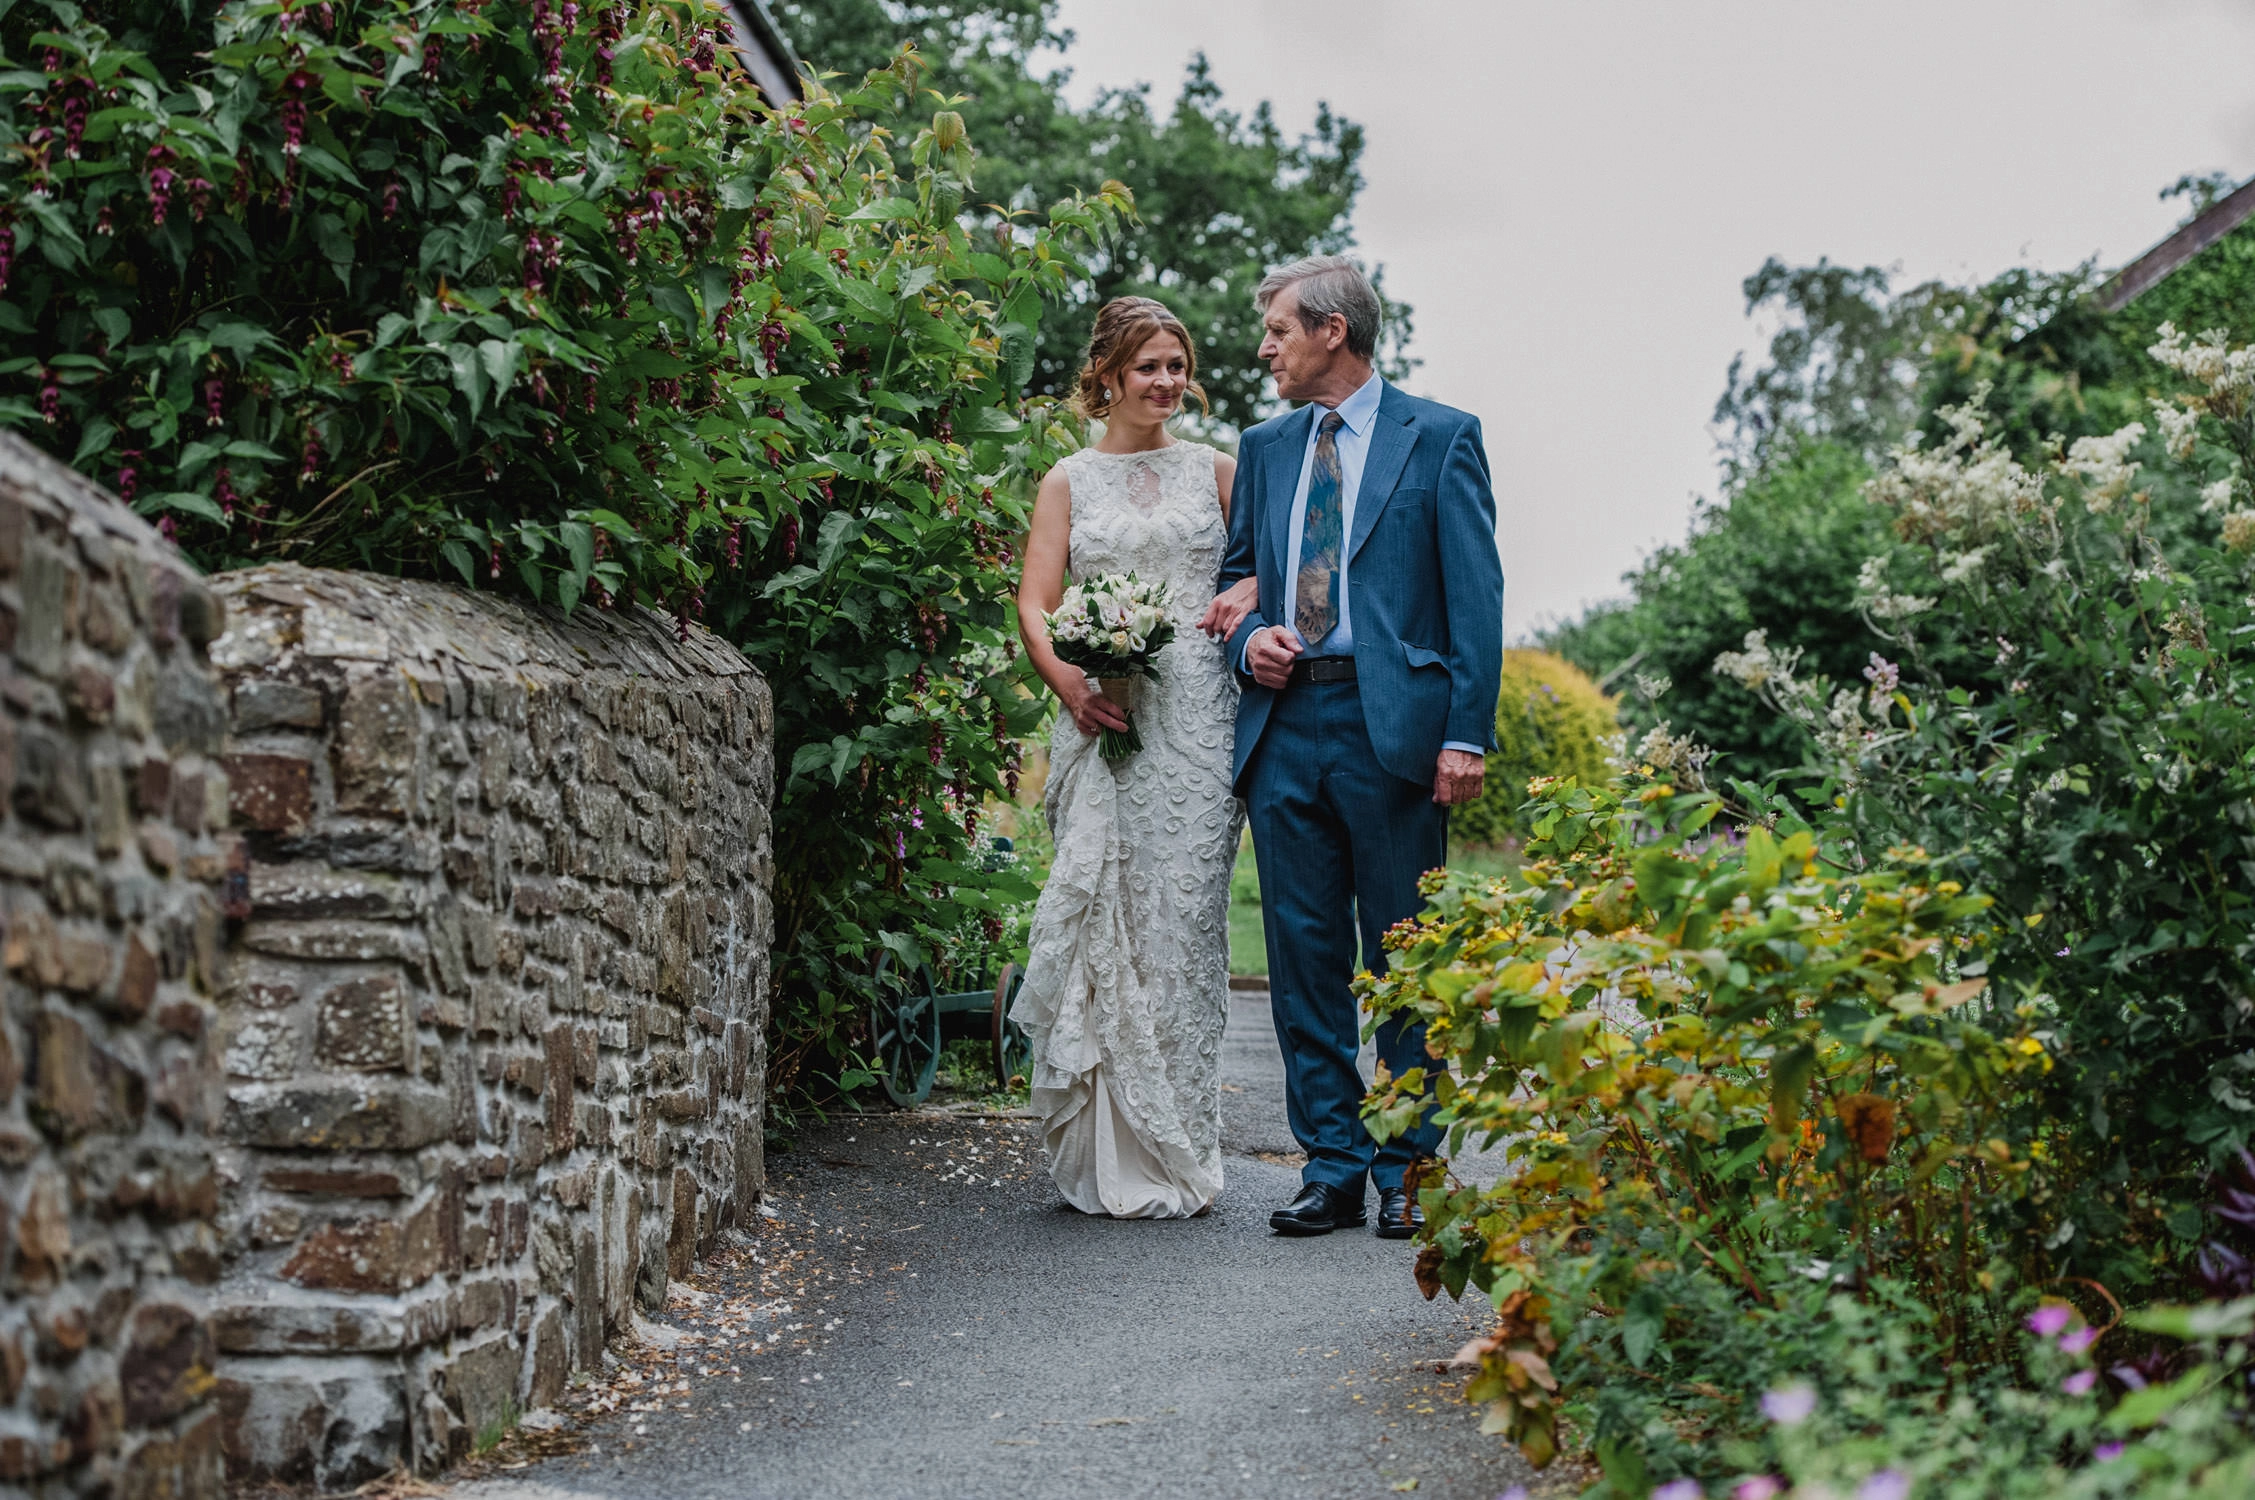 North devon wedding photographer, countryways cottages wedding photography north devon, bride and father walking to ceremony at country ways cottages in north devon